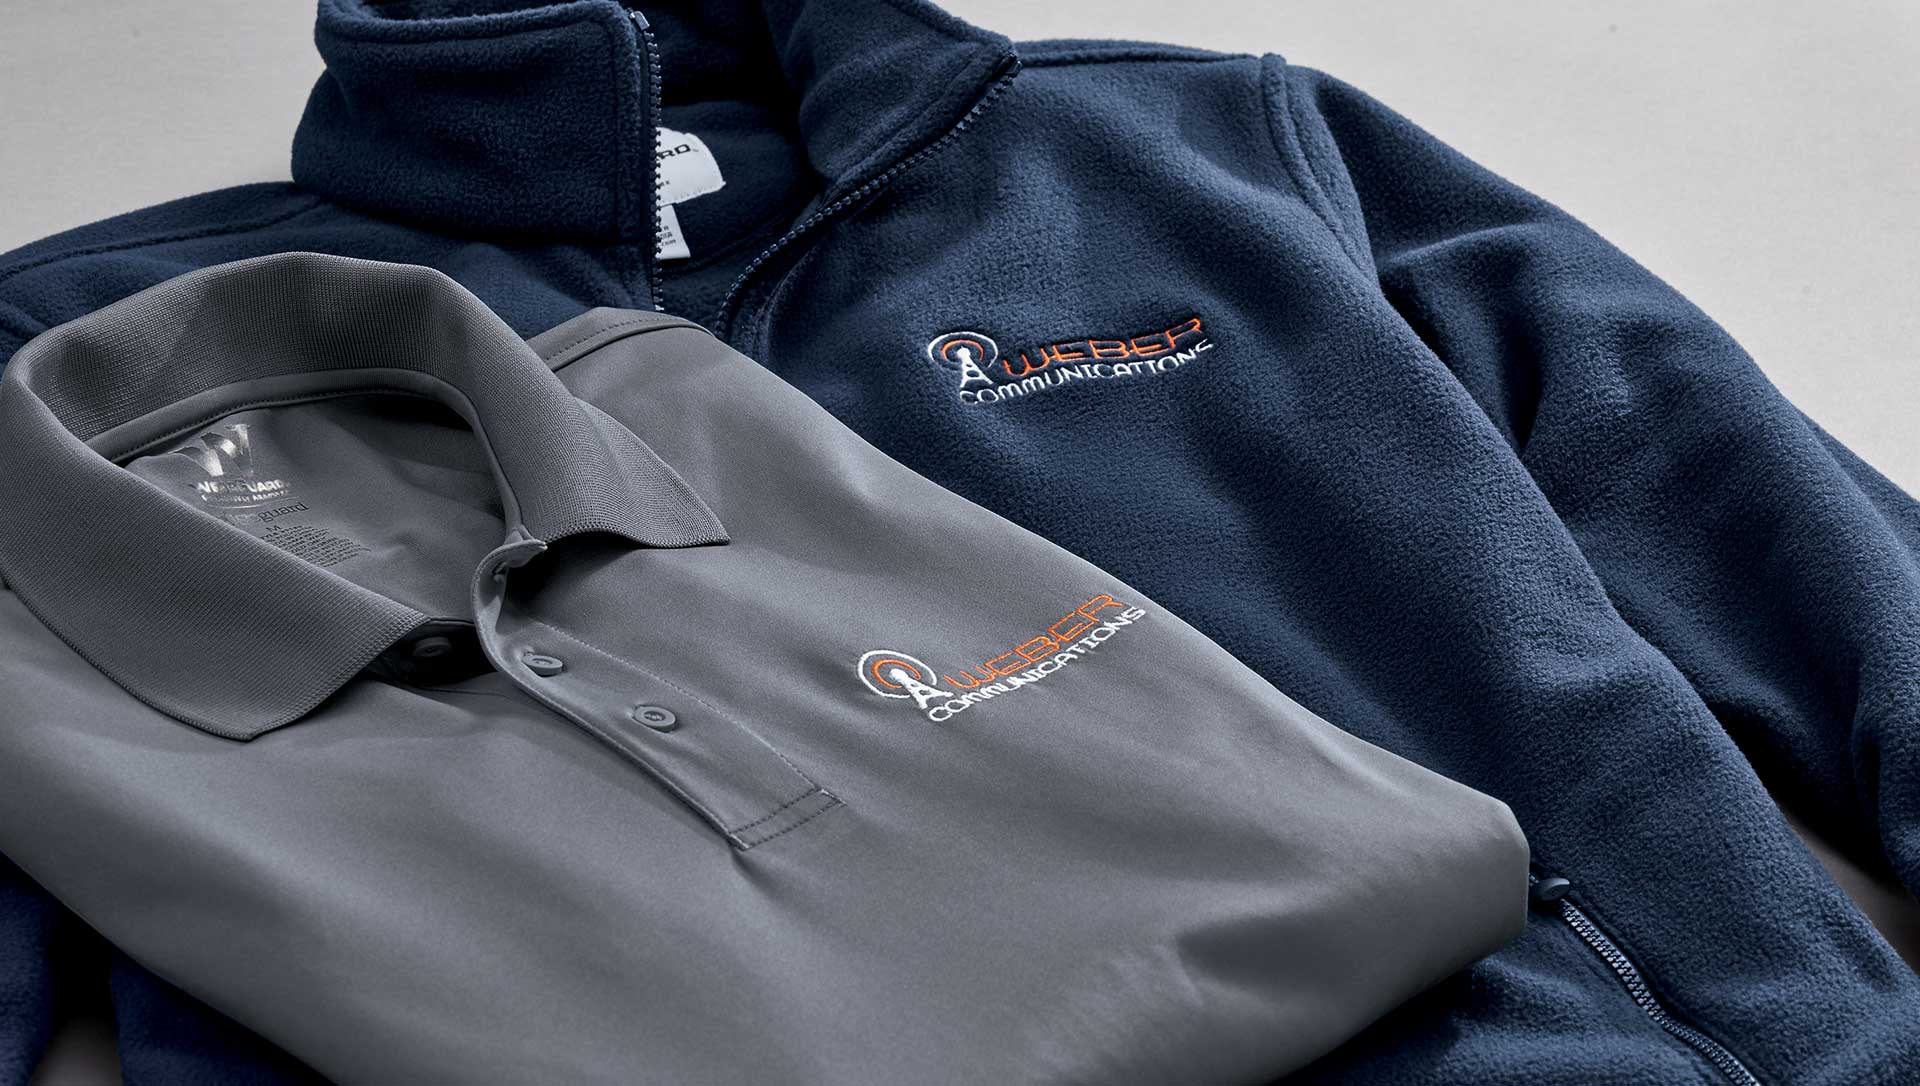 Image of aramark apparel with embroidered logos